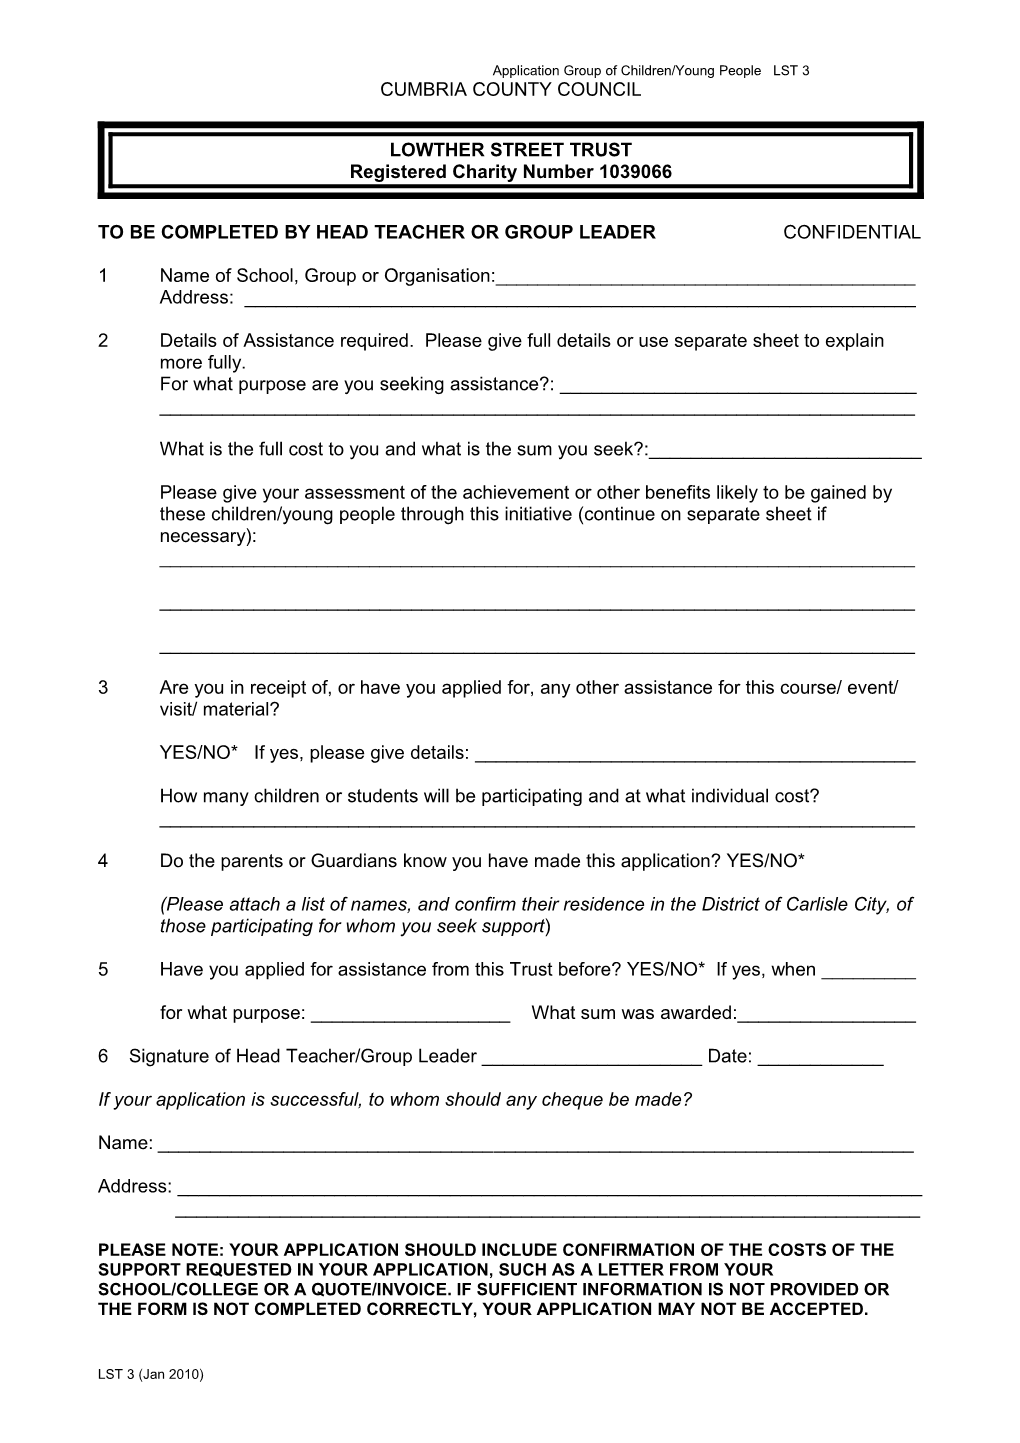 Lowther Street Trust Application Form